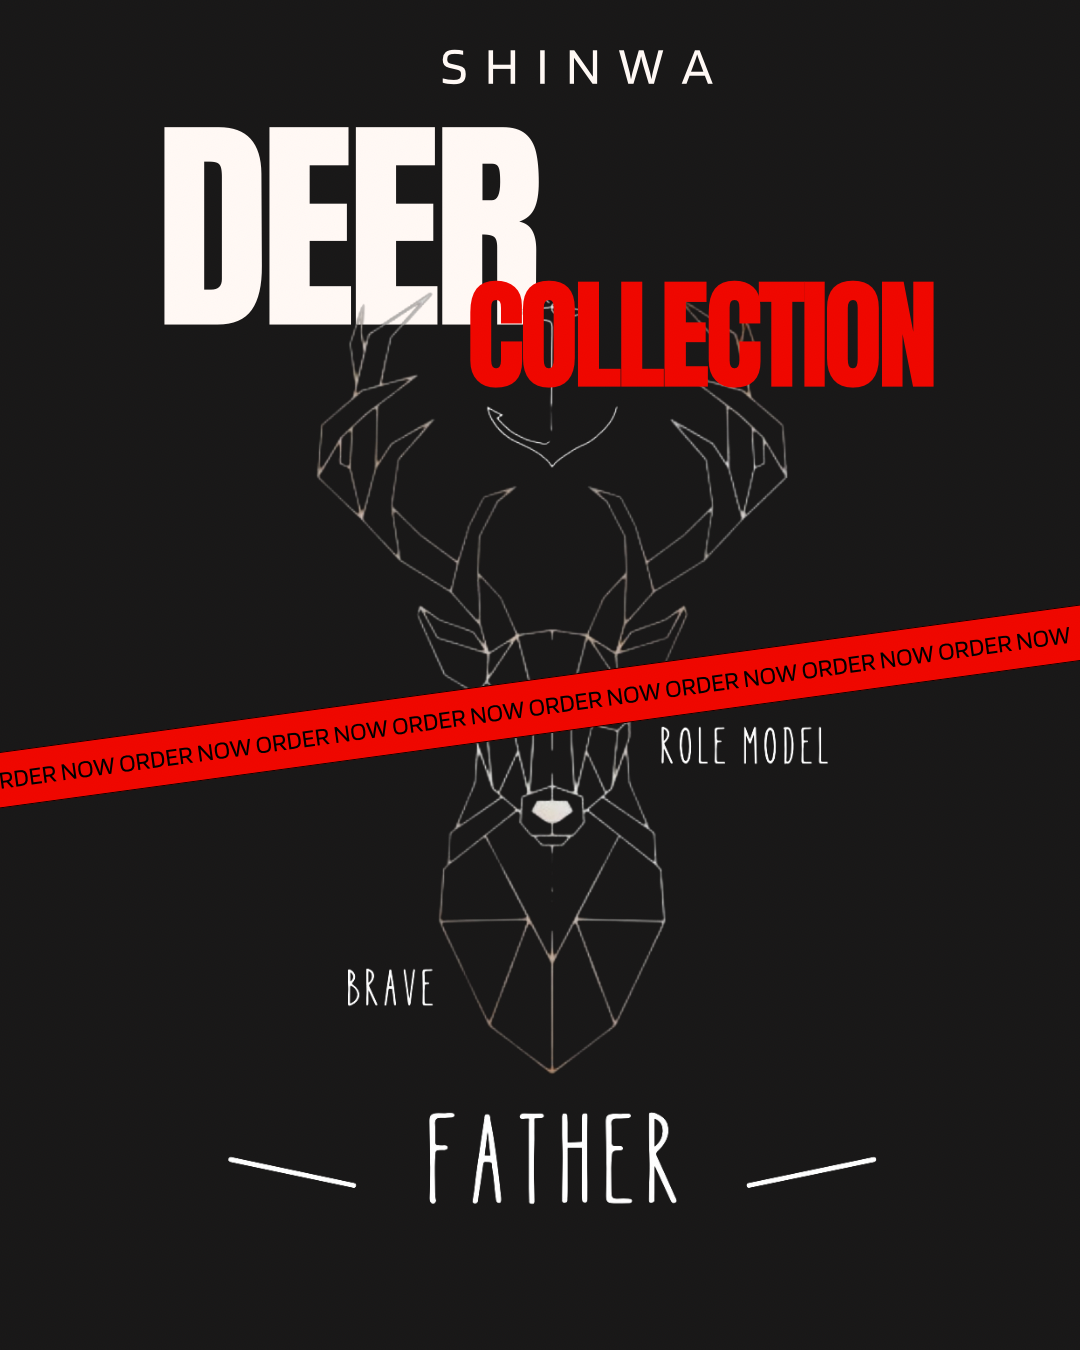 UNIQUE JAPANESE INSPIRED DEER COLLECTION